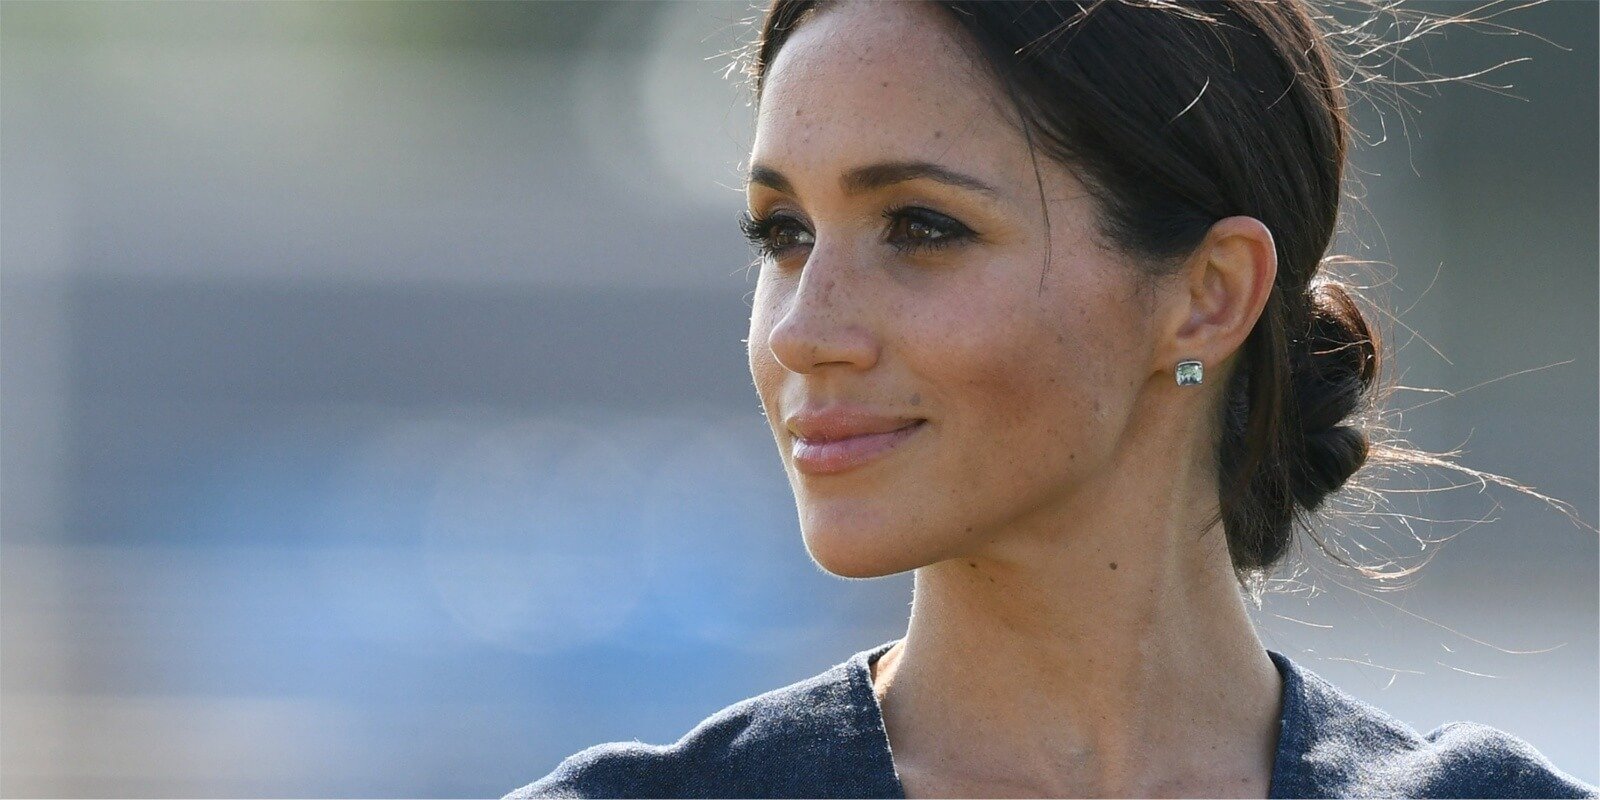 Meghan Markle photographed the Sentebale ISPS Handa Polo Cup at the Royal County of Berkshire Polo Club on July 26, 2018 in Windsor, England.